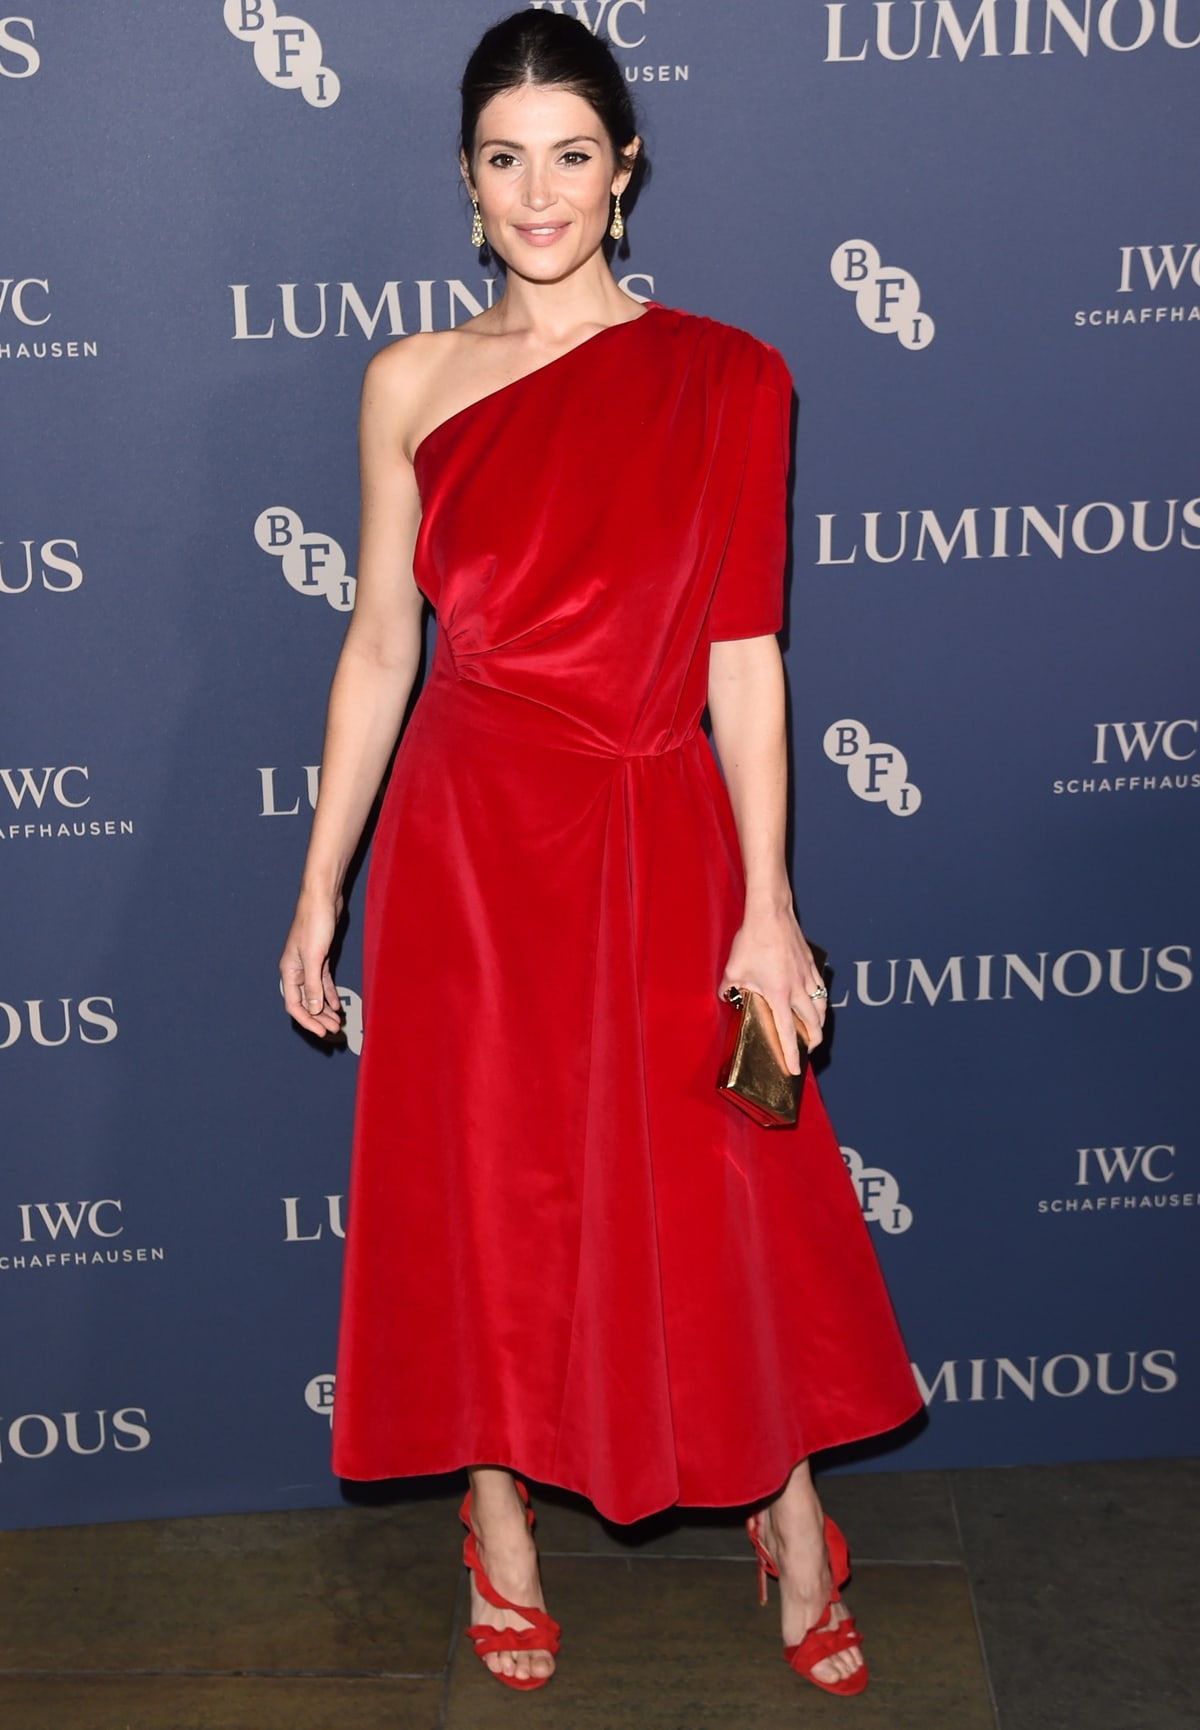 Gemma Arterton wears a red one-shouldered Emilia Wickstead velvet dress paired with Aquazzura ruffled suede sandals at the BFI Luminous Fundraising Gala